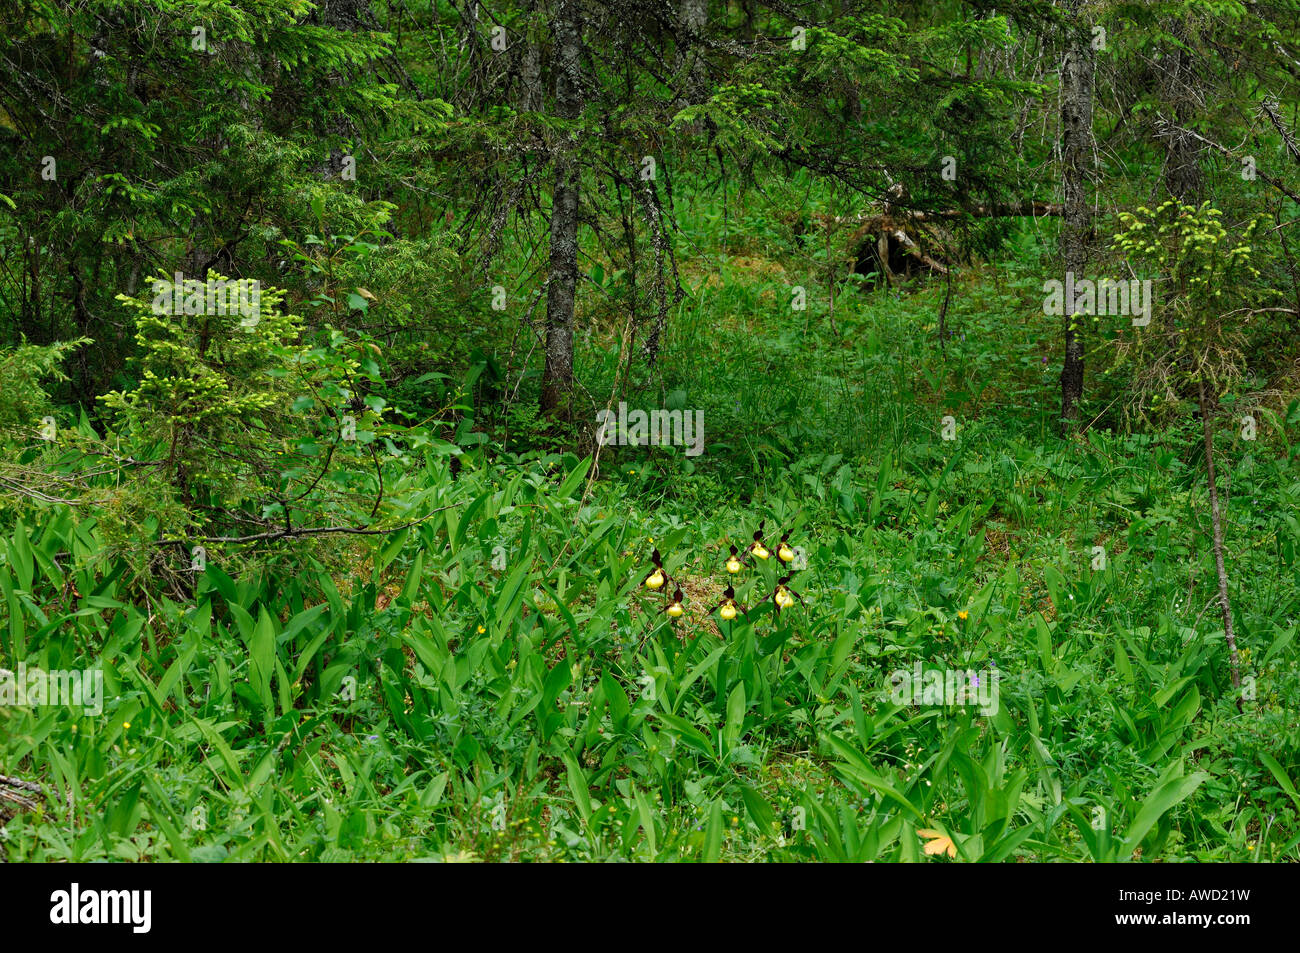 Lady's Slipper Orchid (Cypripedium calceolus) biotope, coniferous forest, Norway, Scandinavia, Europe Stock Photo